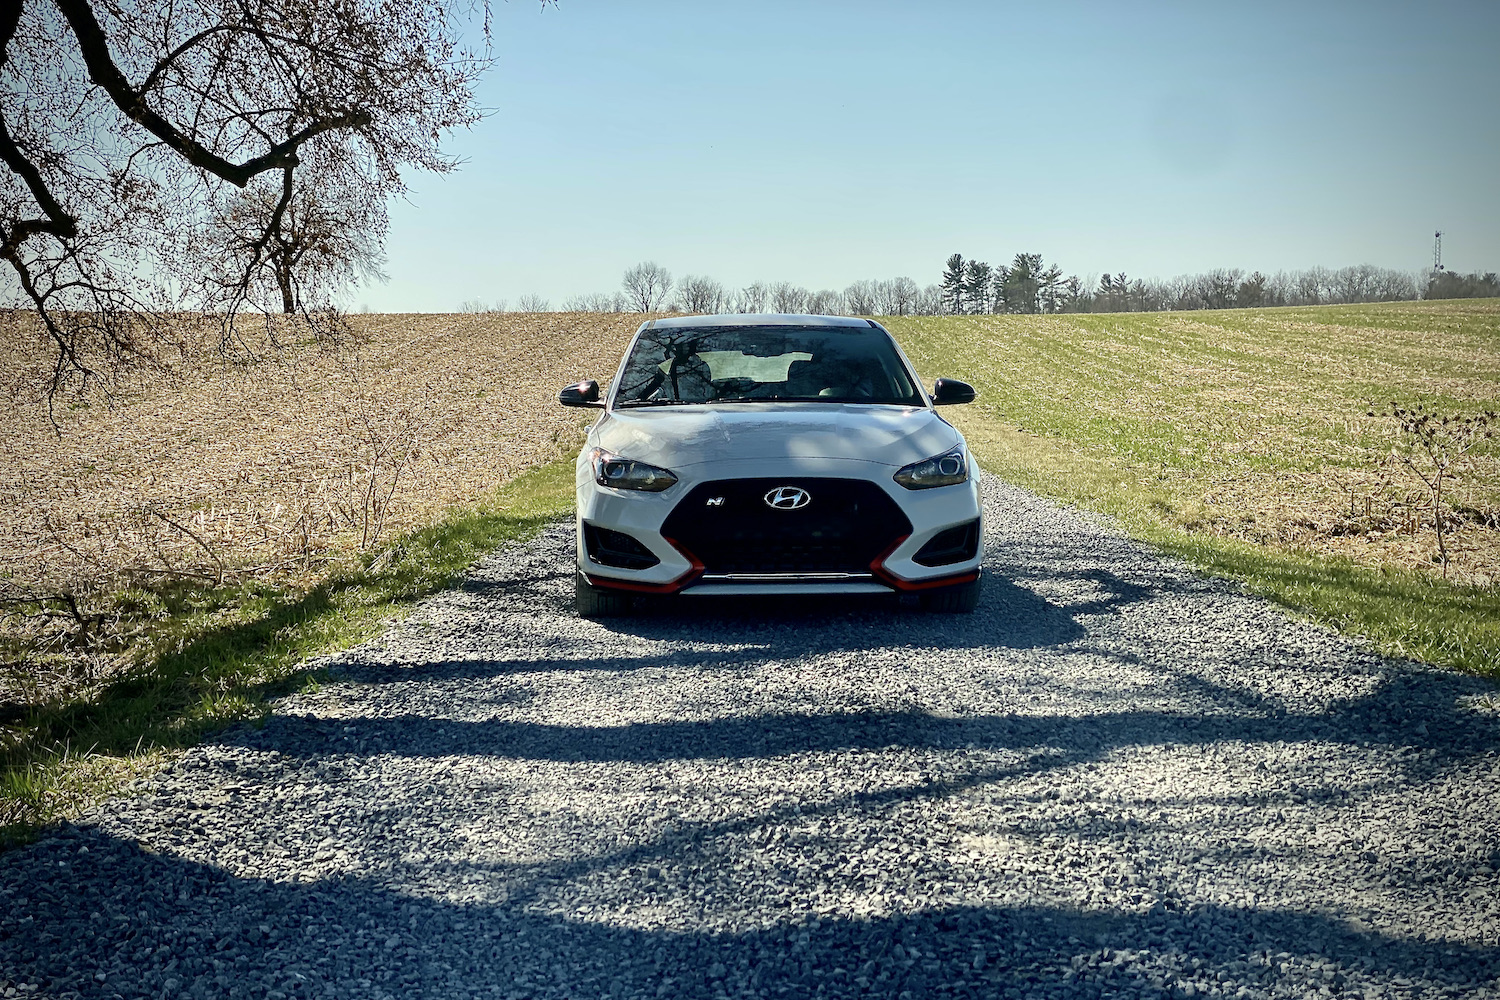 Hyundai Veloster N front end on a dirt path in a field.